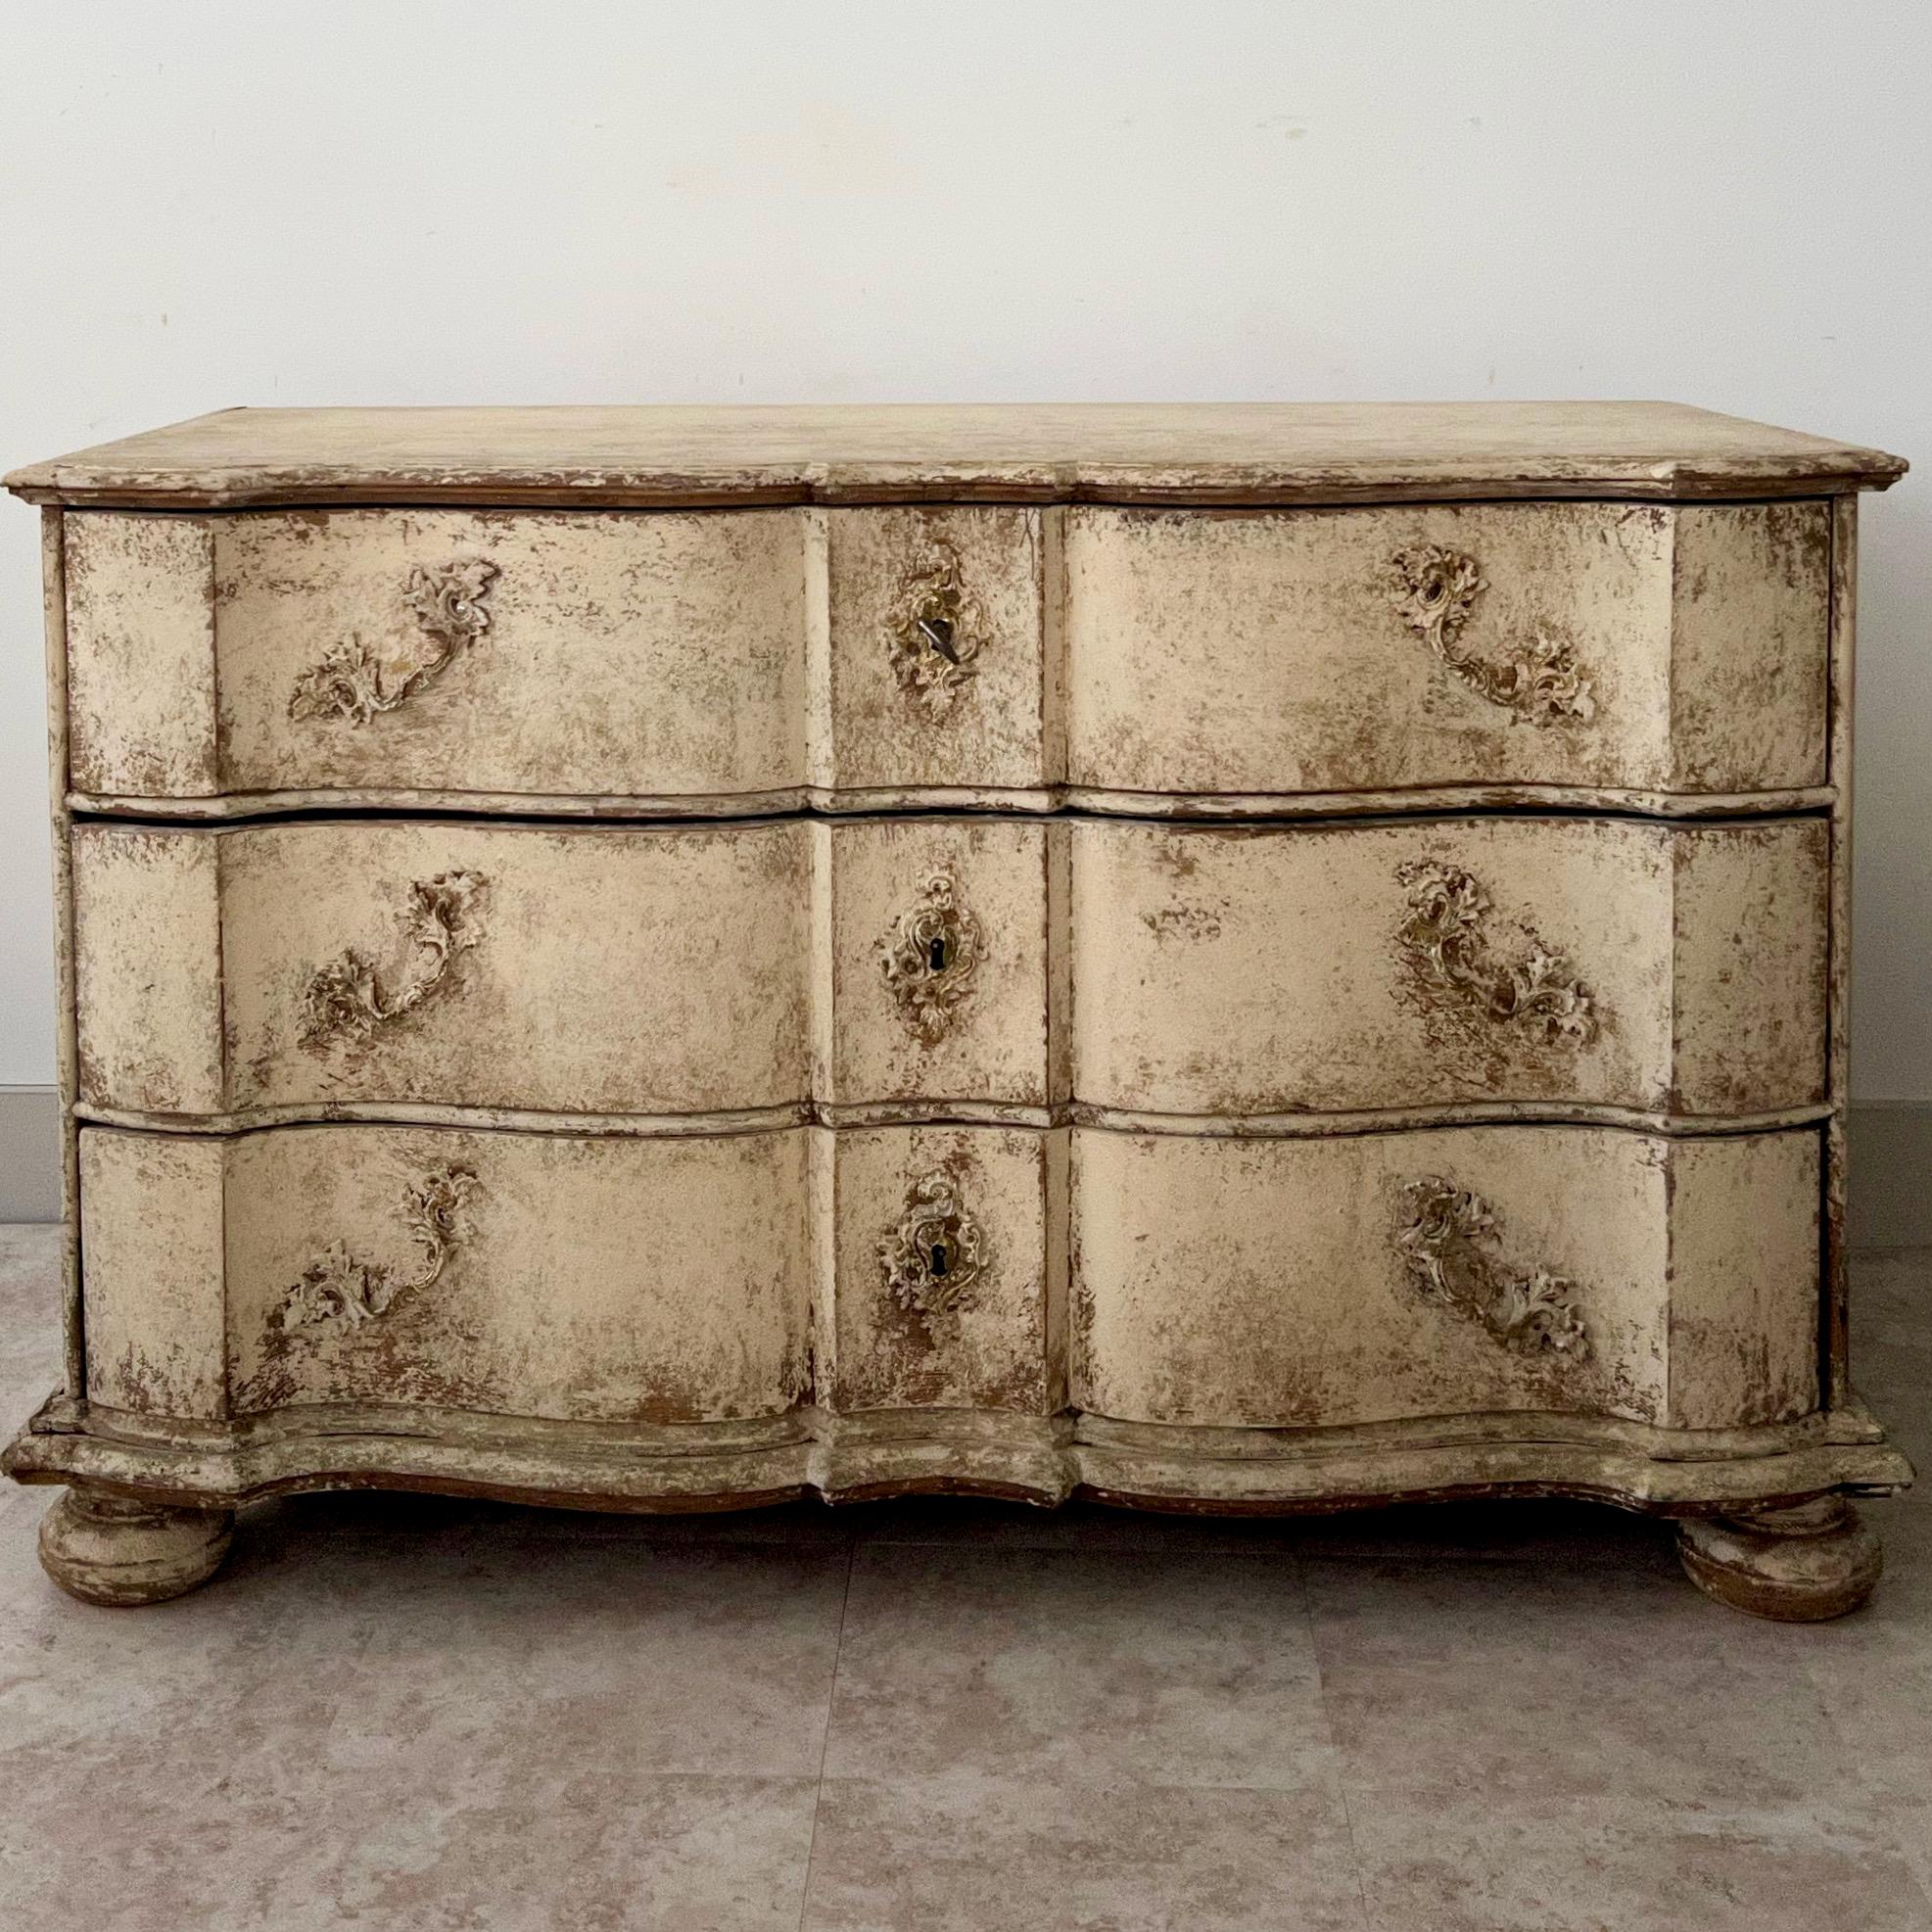 18th century Painted Baroque commode from Alsace region, France.